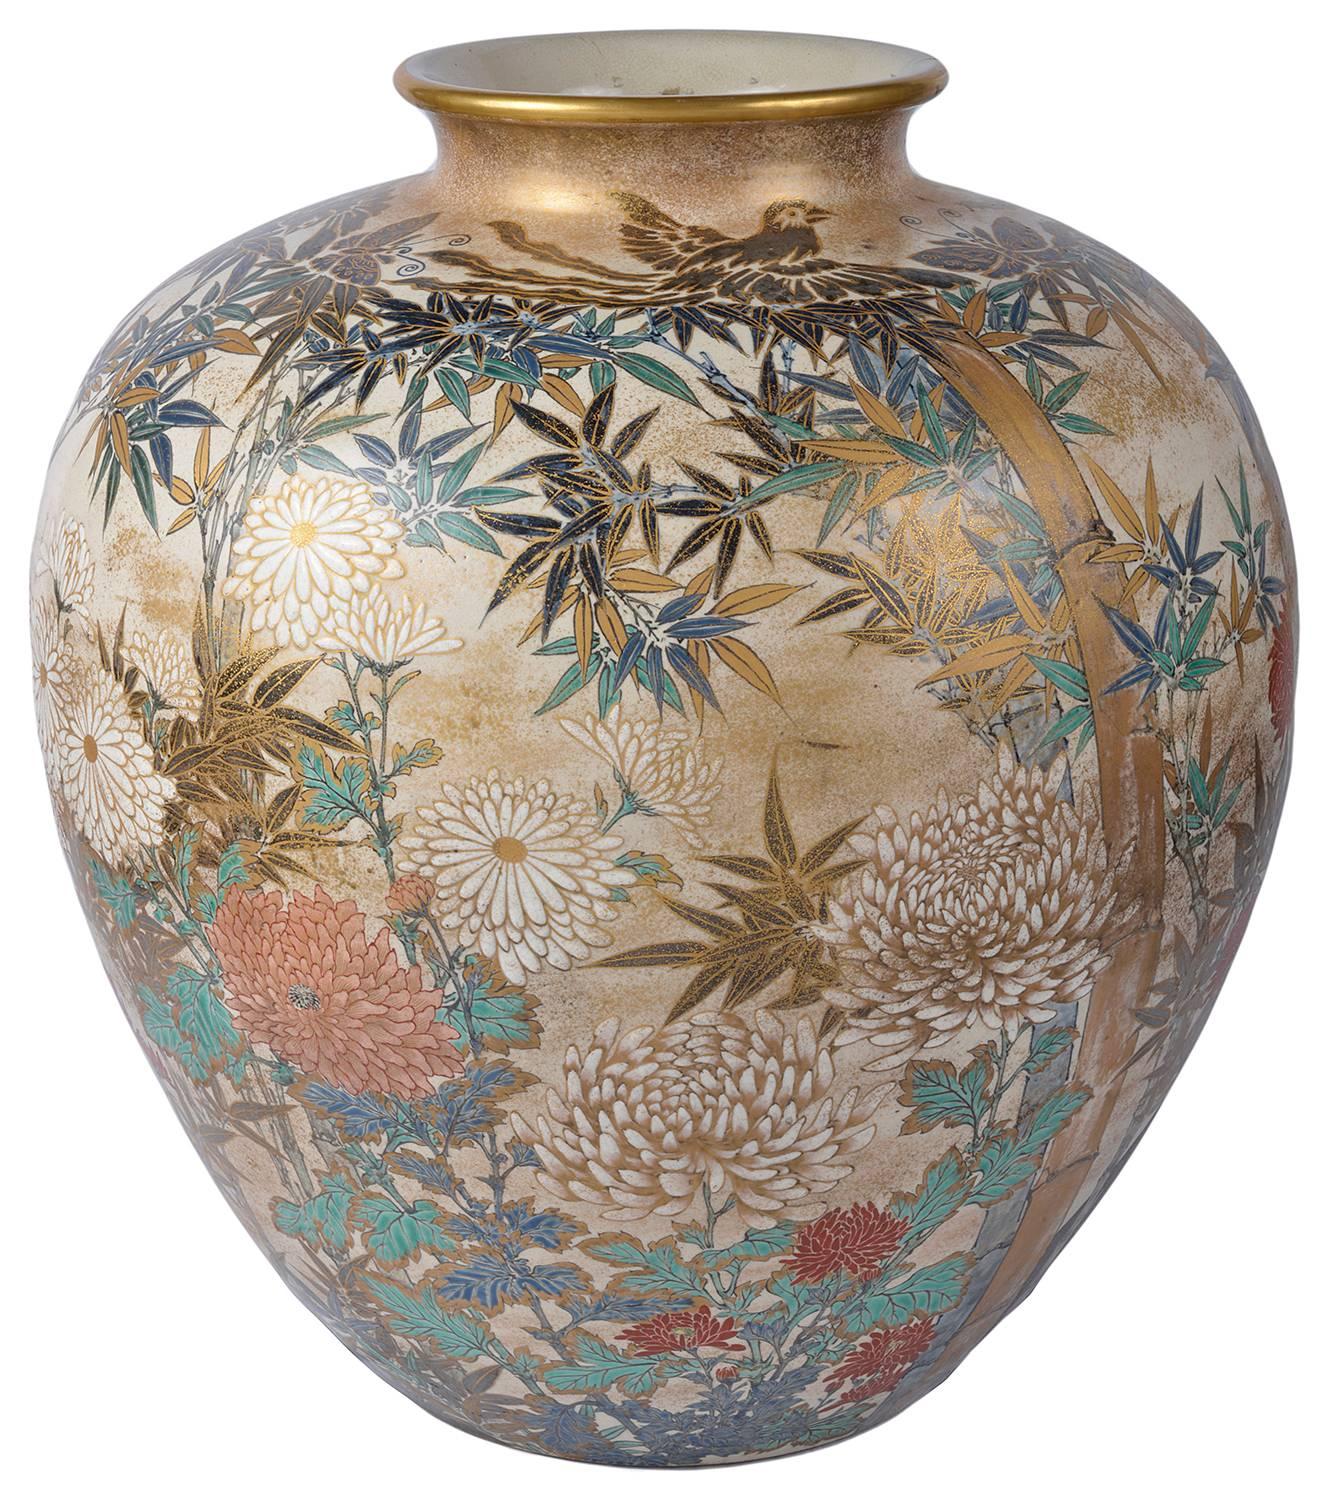 A very good quality large late 19th century Japanese Satsuma vase. Depicting hand painted flowers and bamboo in classical Satsuma colors.